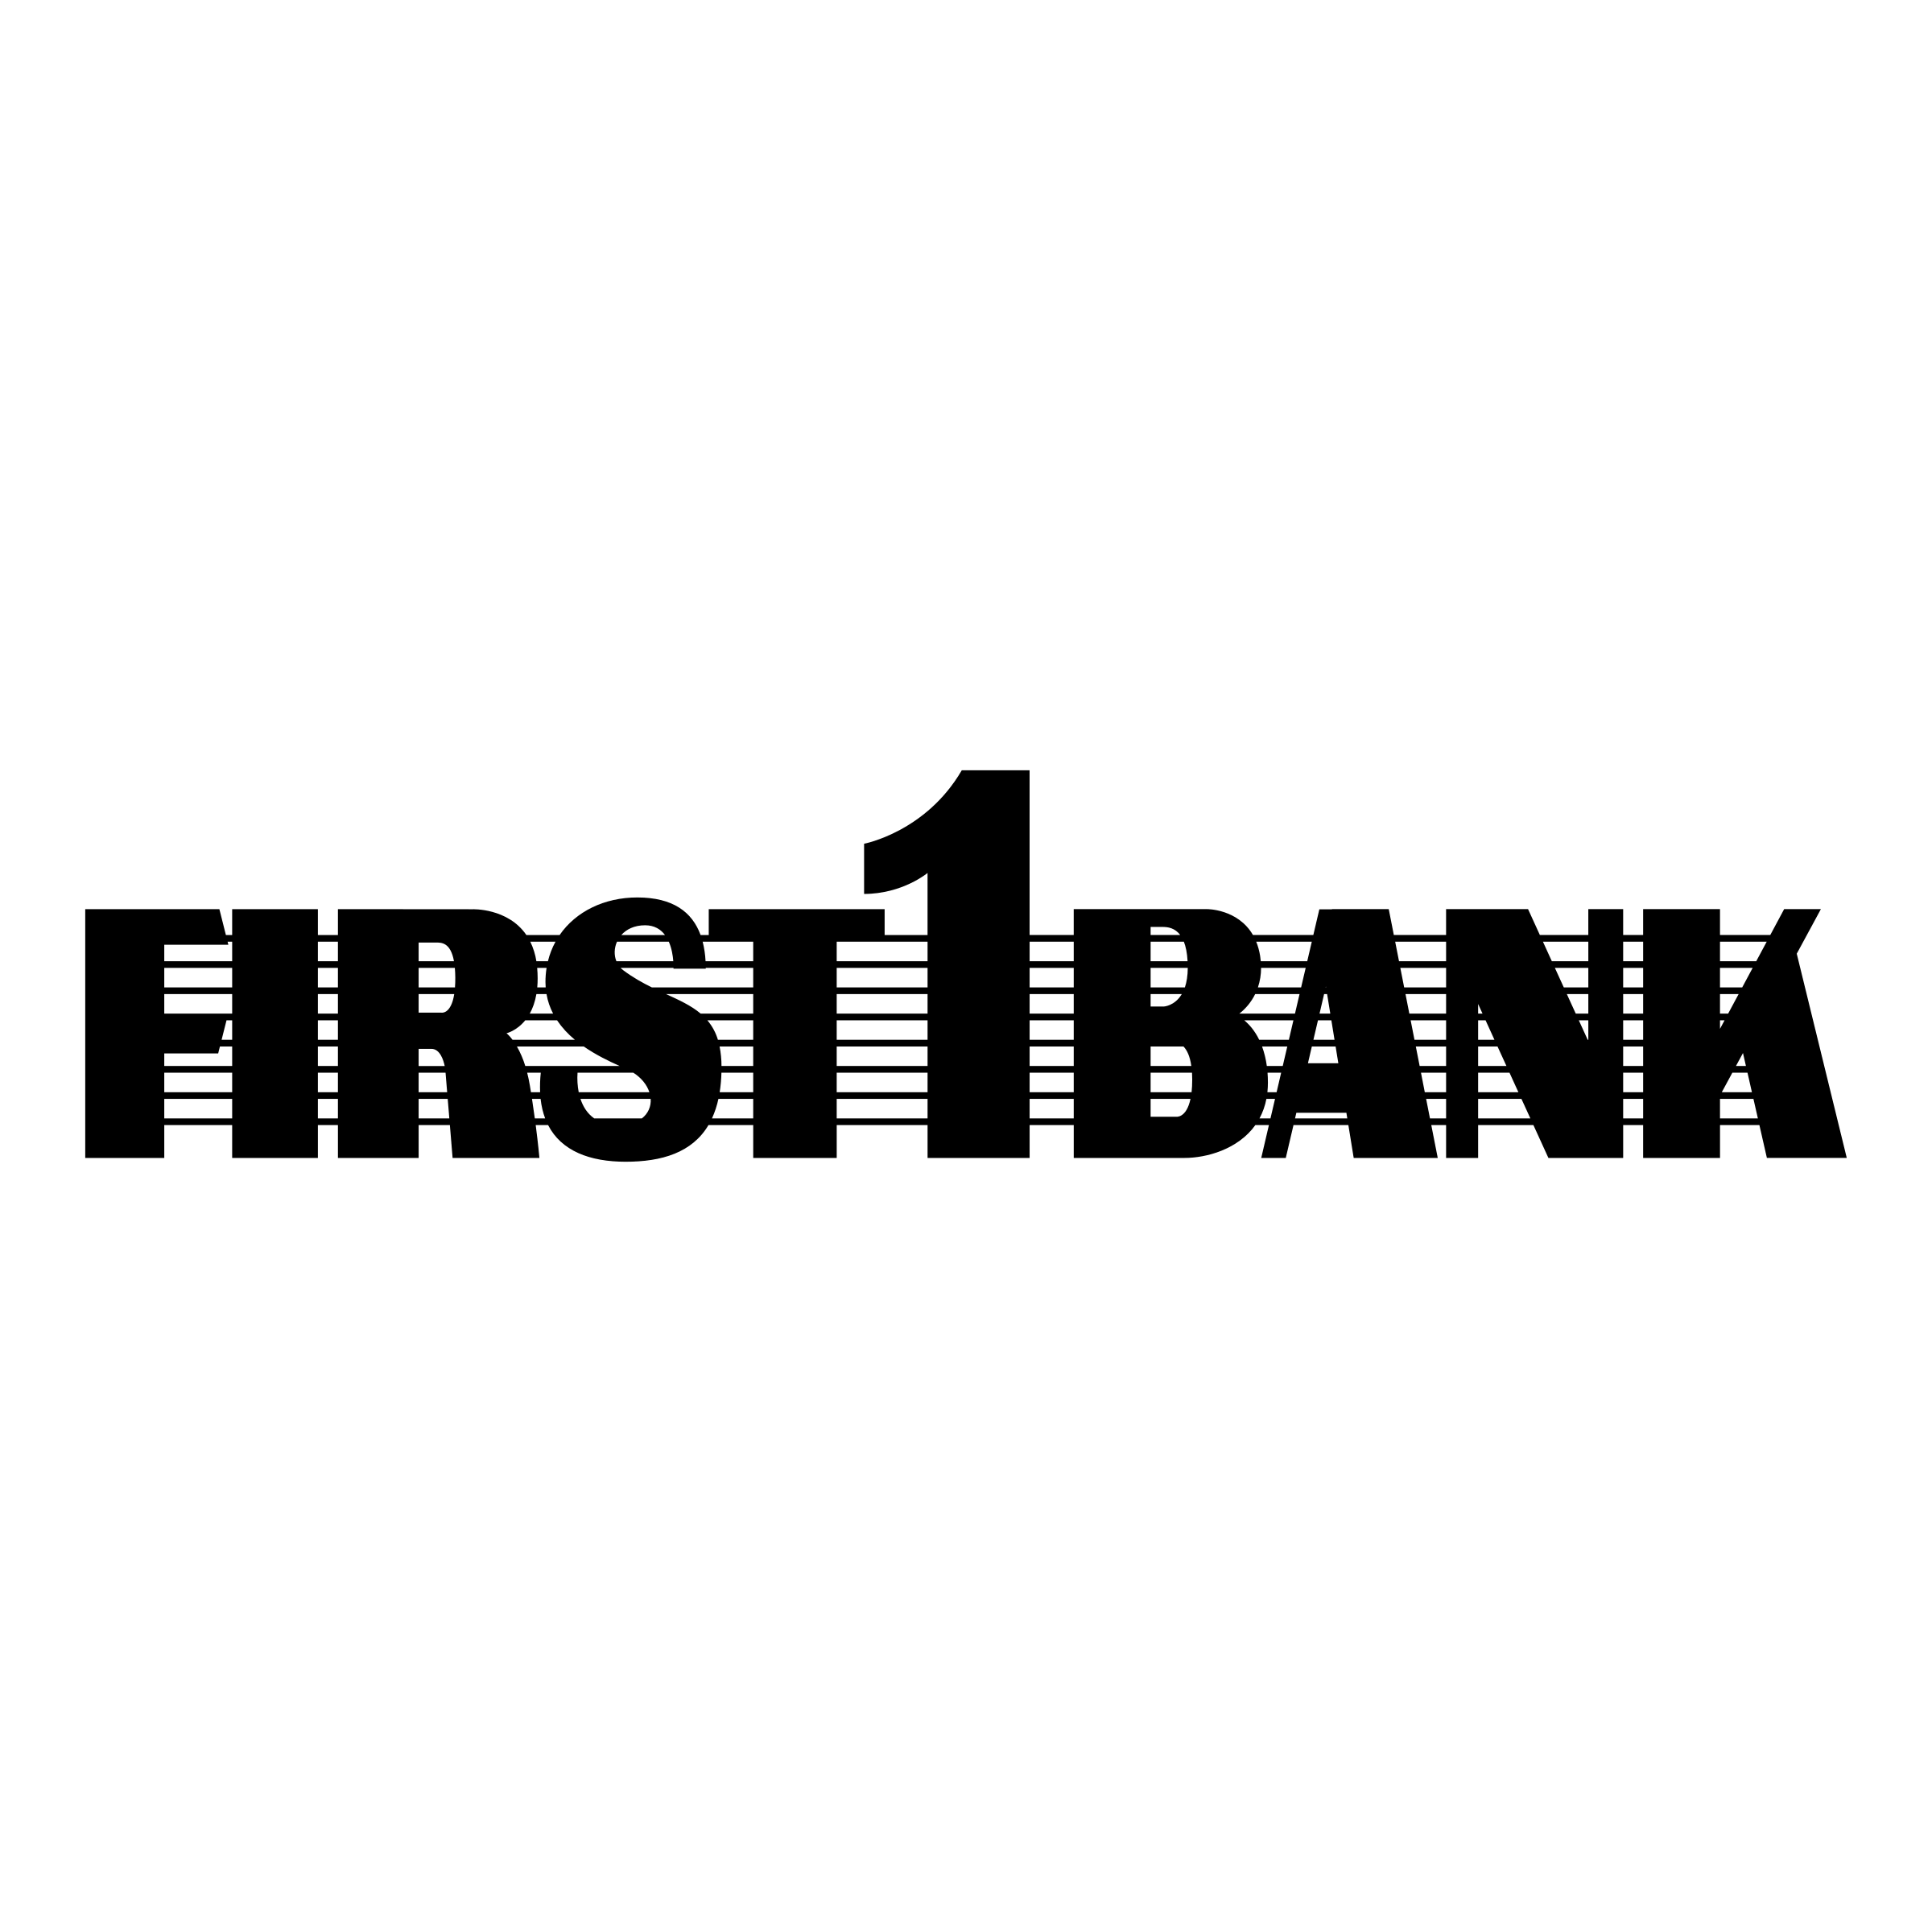 First White Logo - First Bank Logo SVG Vector & PNG Transparent - Vector Logo Supply